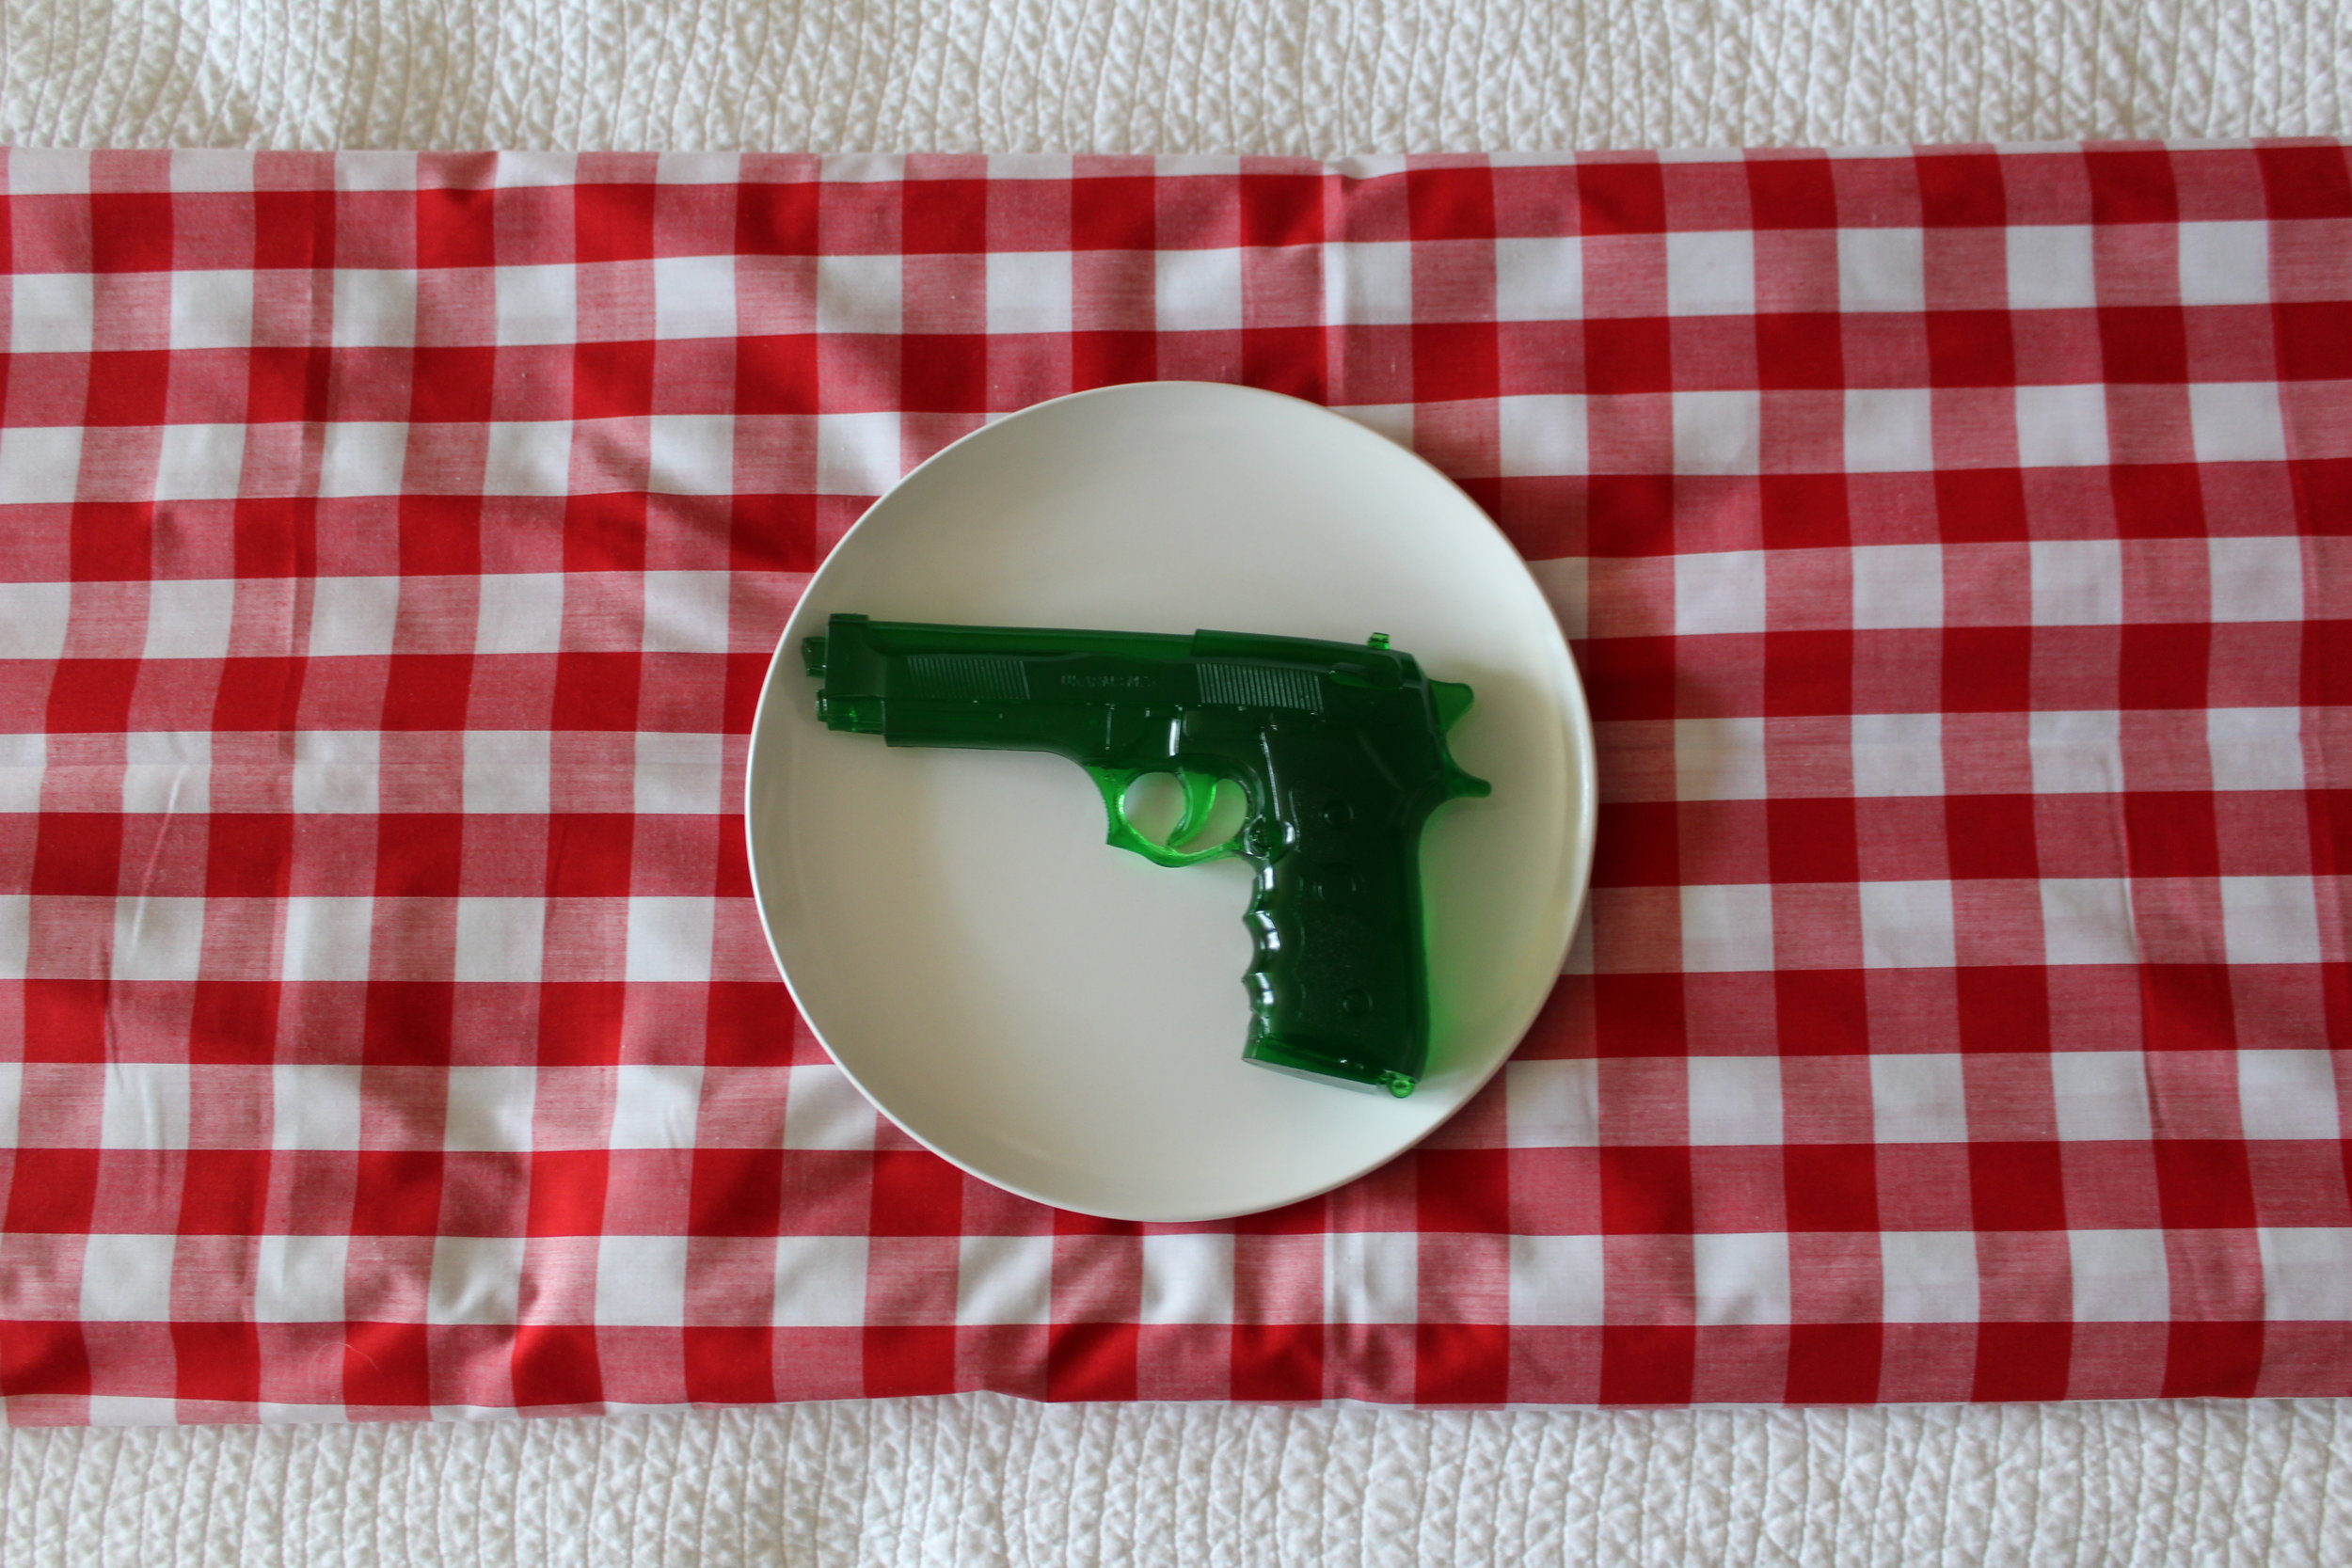   No You Shave  (detail), Jello Gun, Plate &amp; Gingham Tablecloth on Bed, 2015 Photo: Juventino Aranda 